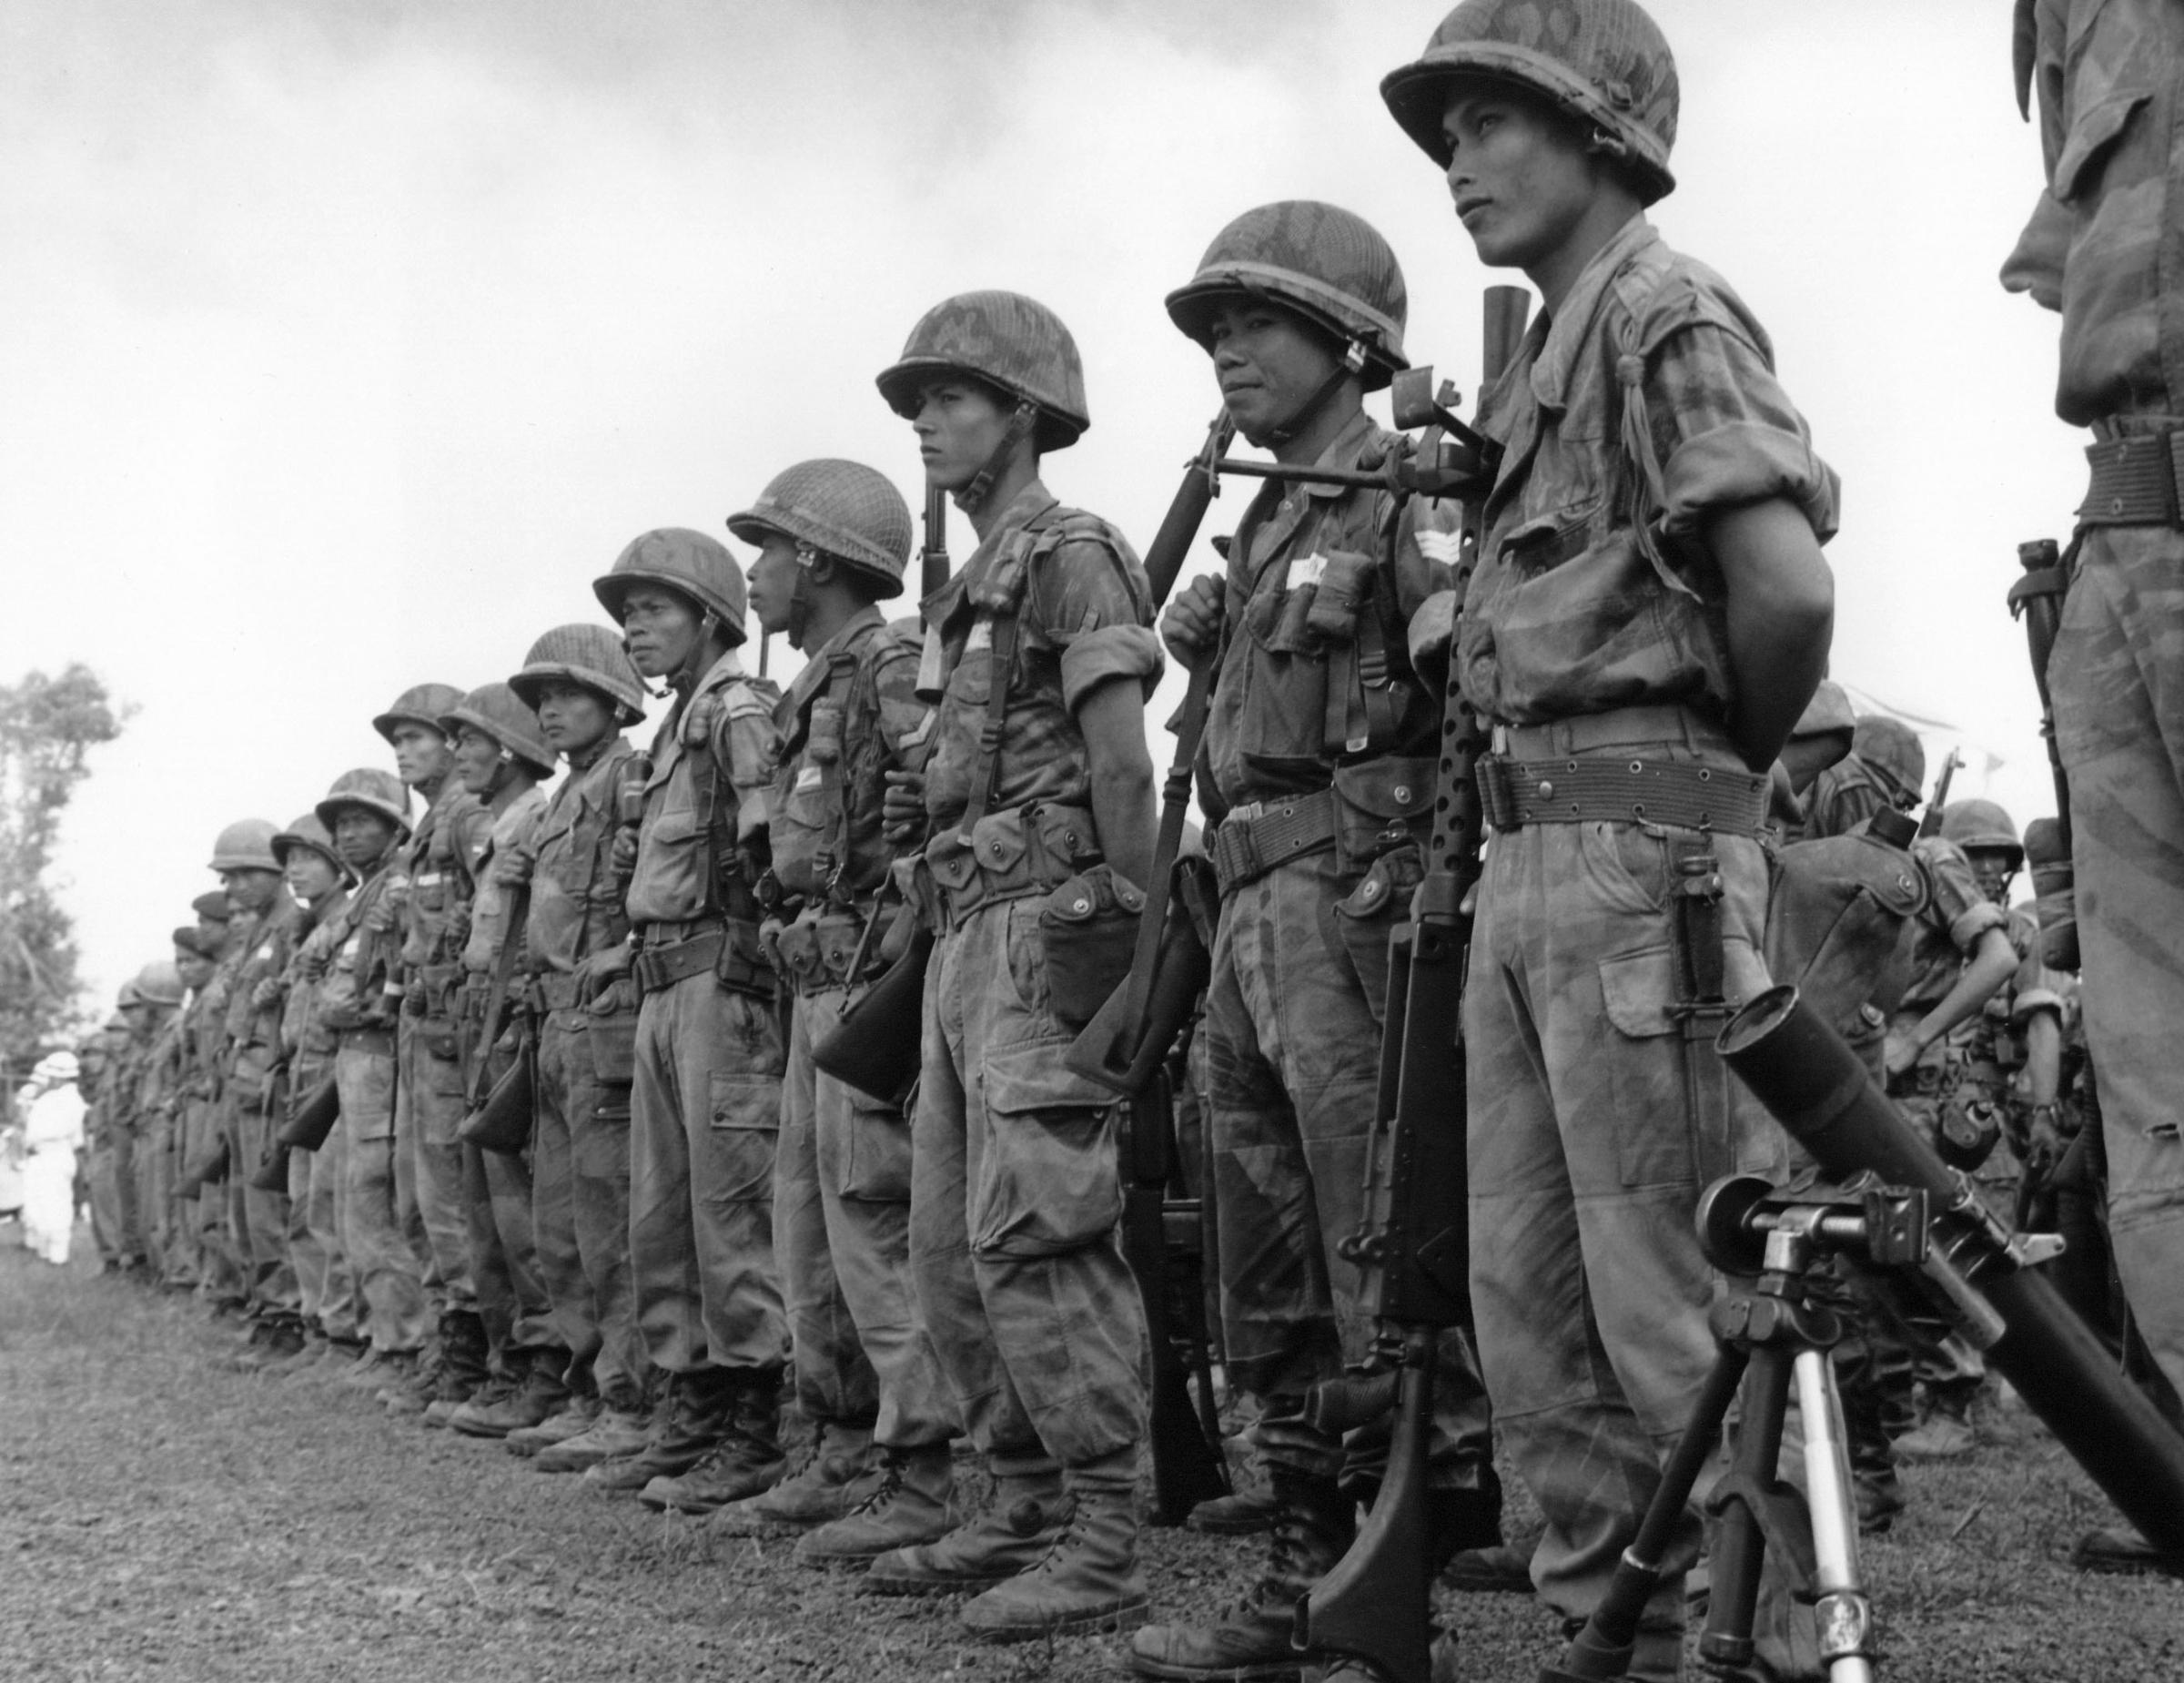 South Vietnamese government troops at Moc Hoa village some 60 miles Southwest of Saigon after a second major victory over Viet Cong rebels on Aug. 24, 1961.